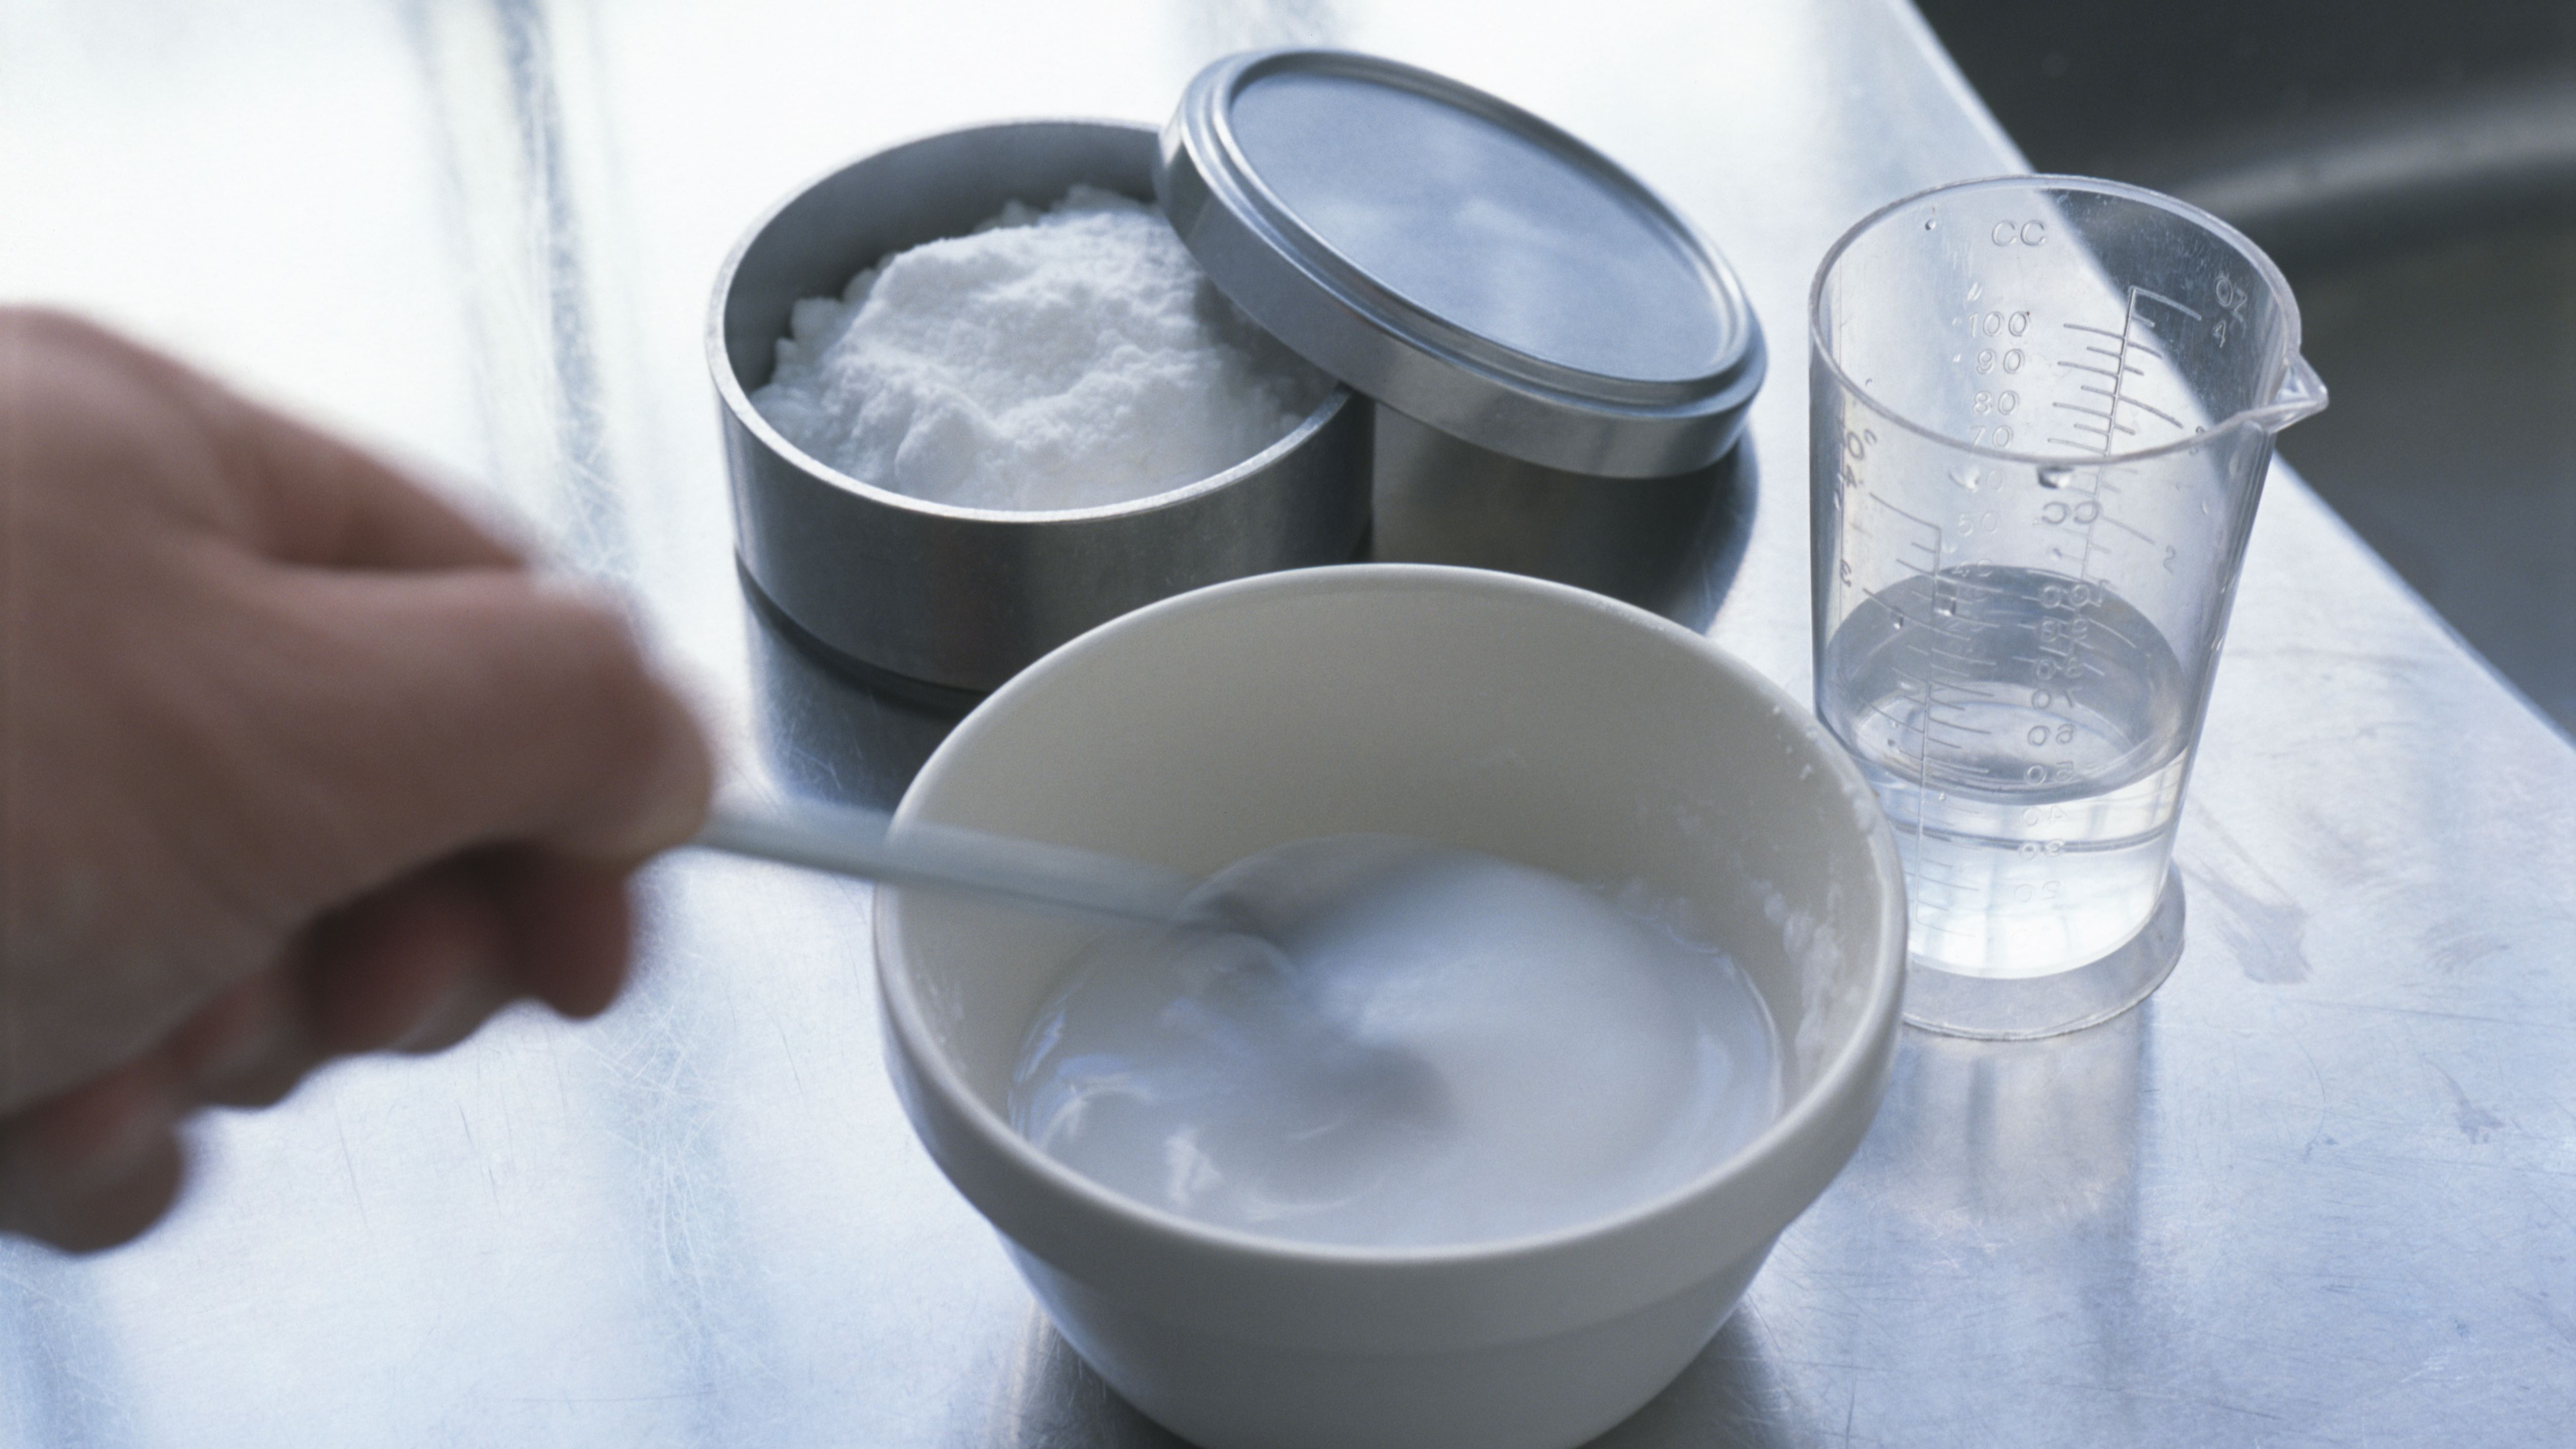 Baking soda and water paste is a very common natural remedy.